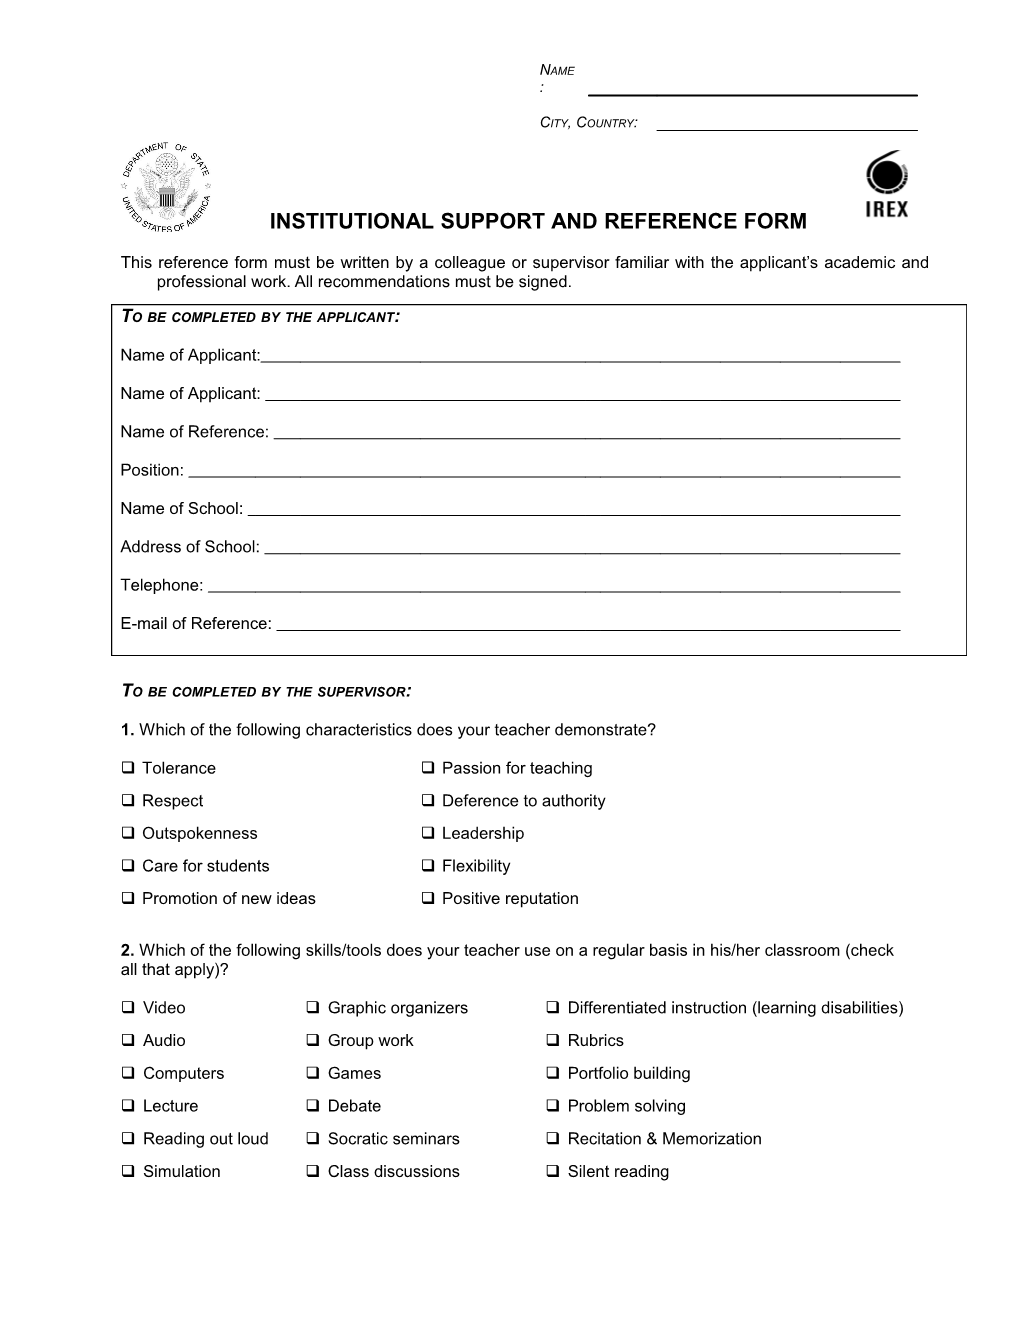 Institutional Support and Reference Form